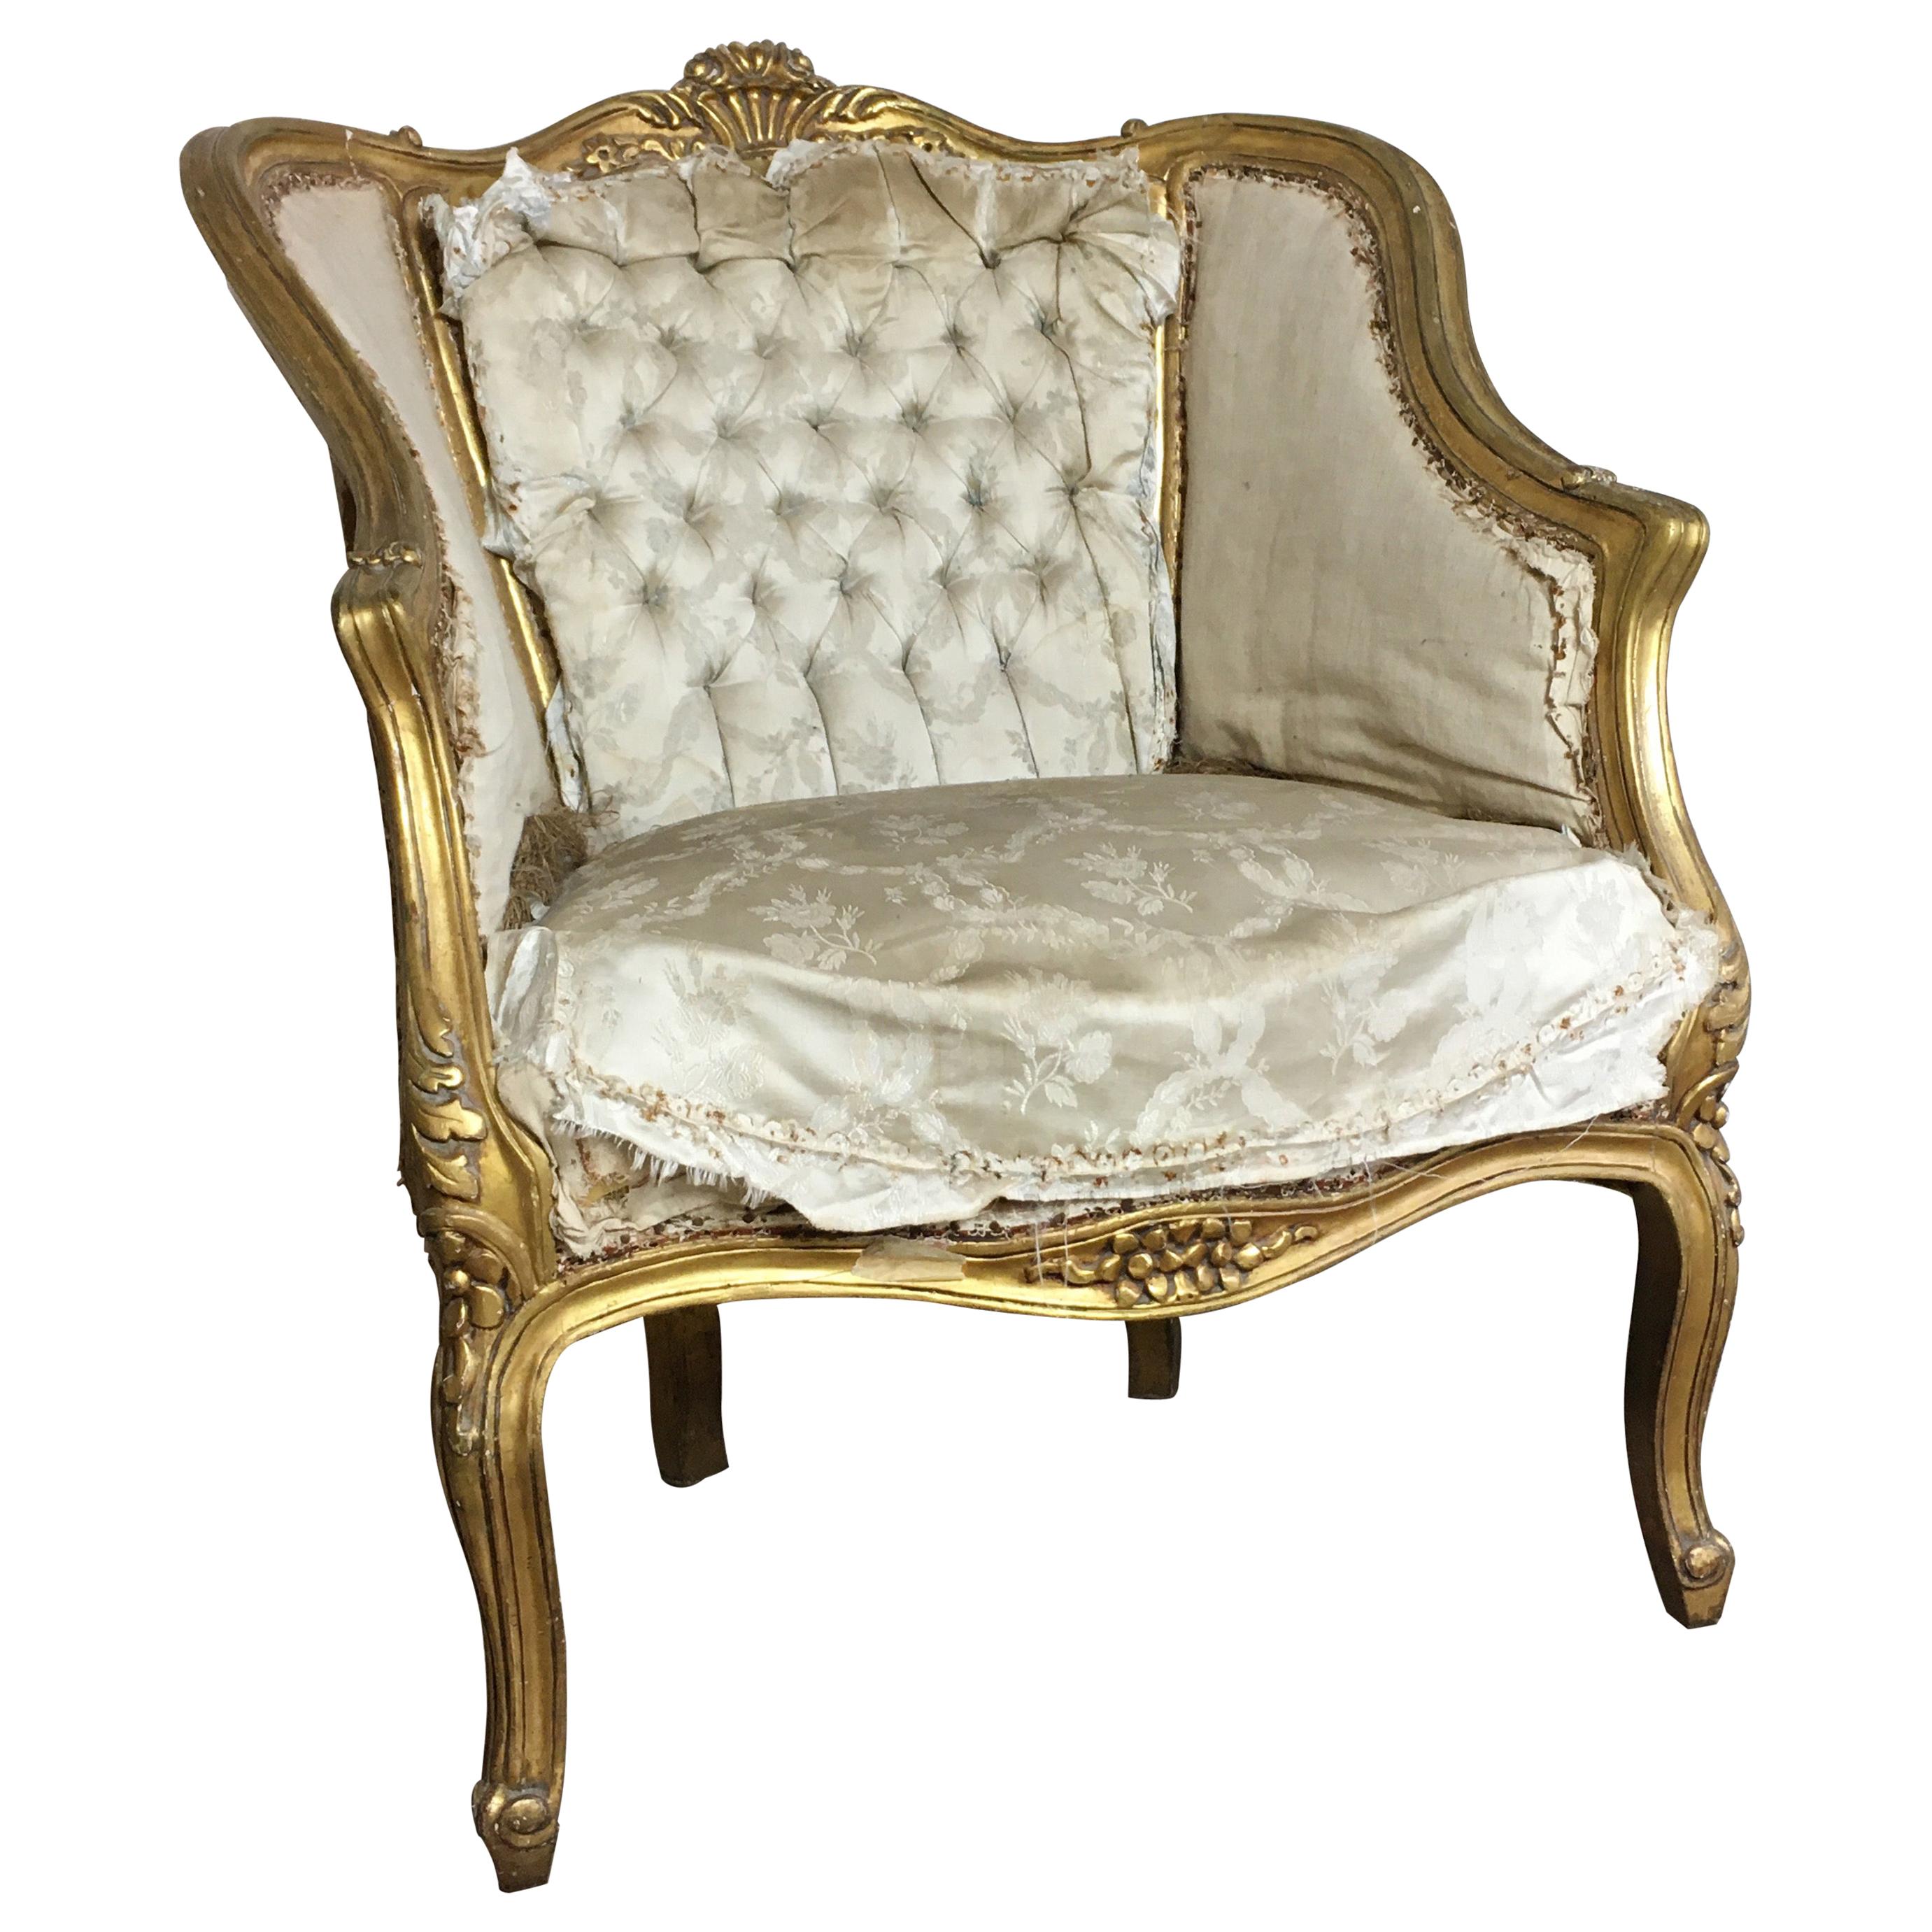 French Louis XV Style Giltwood Armchair, circa 1900 for re-upholstery